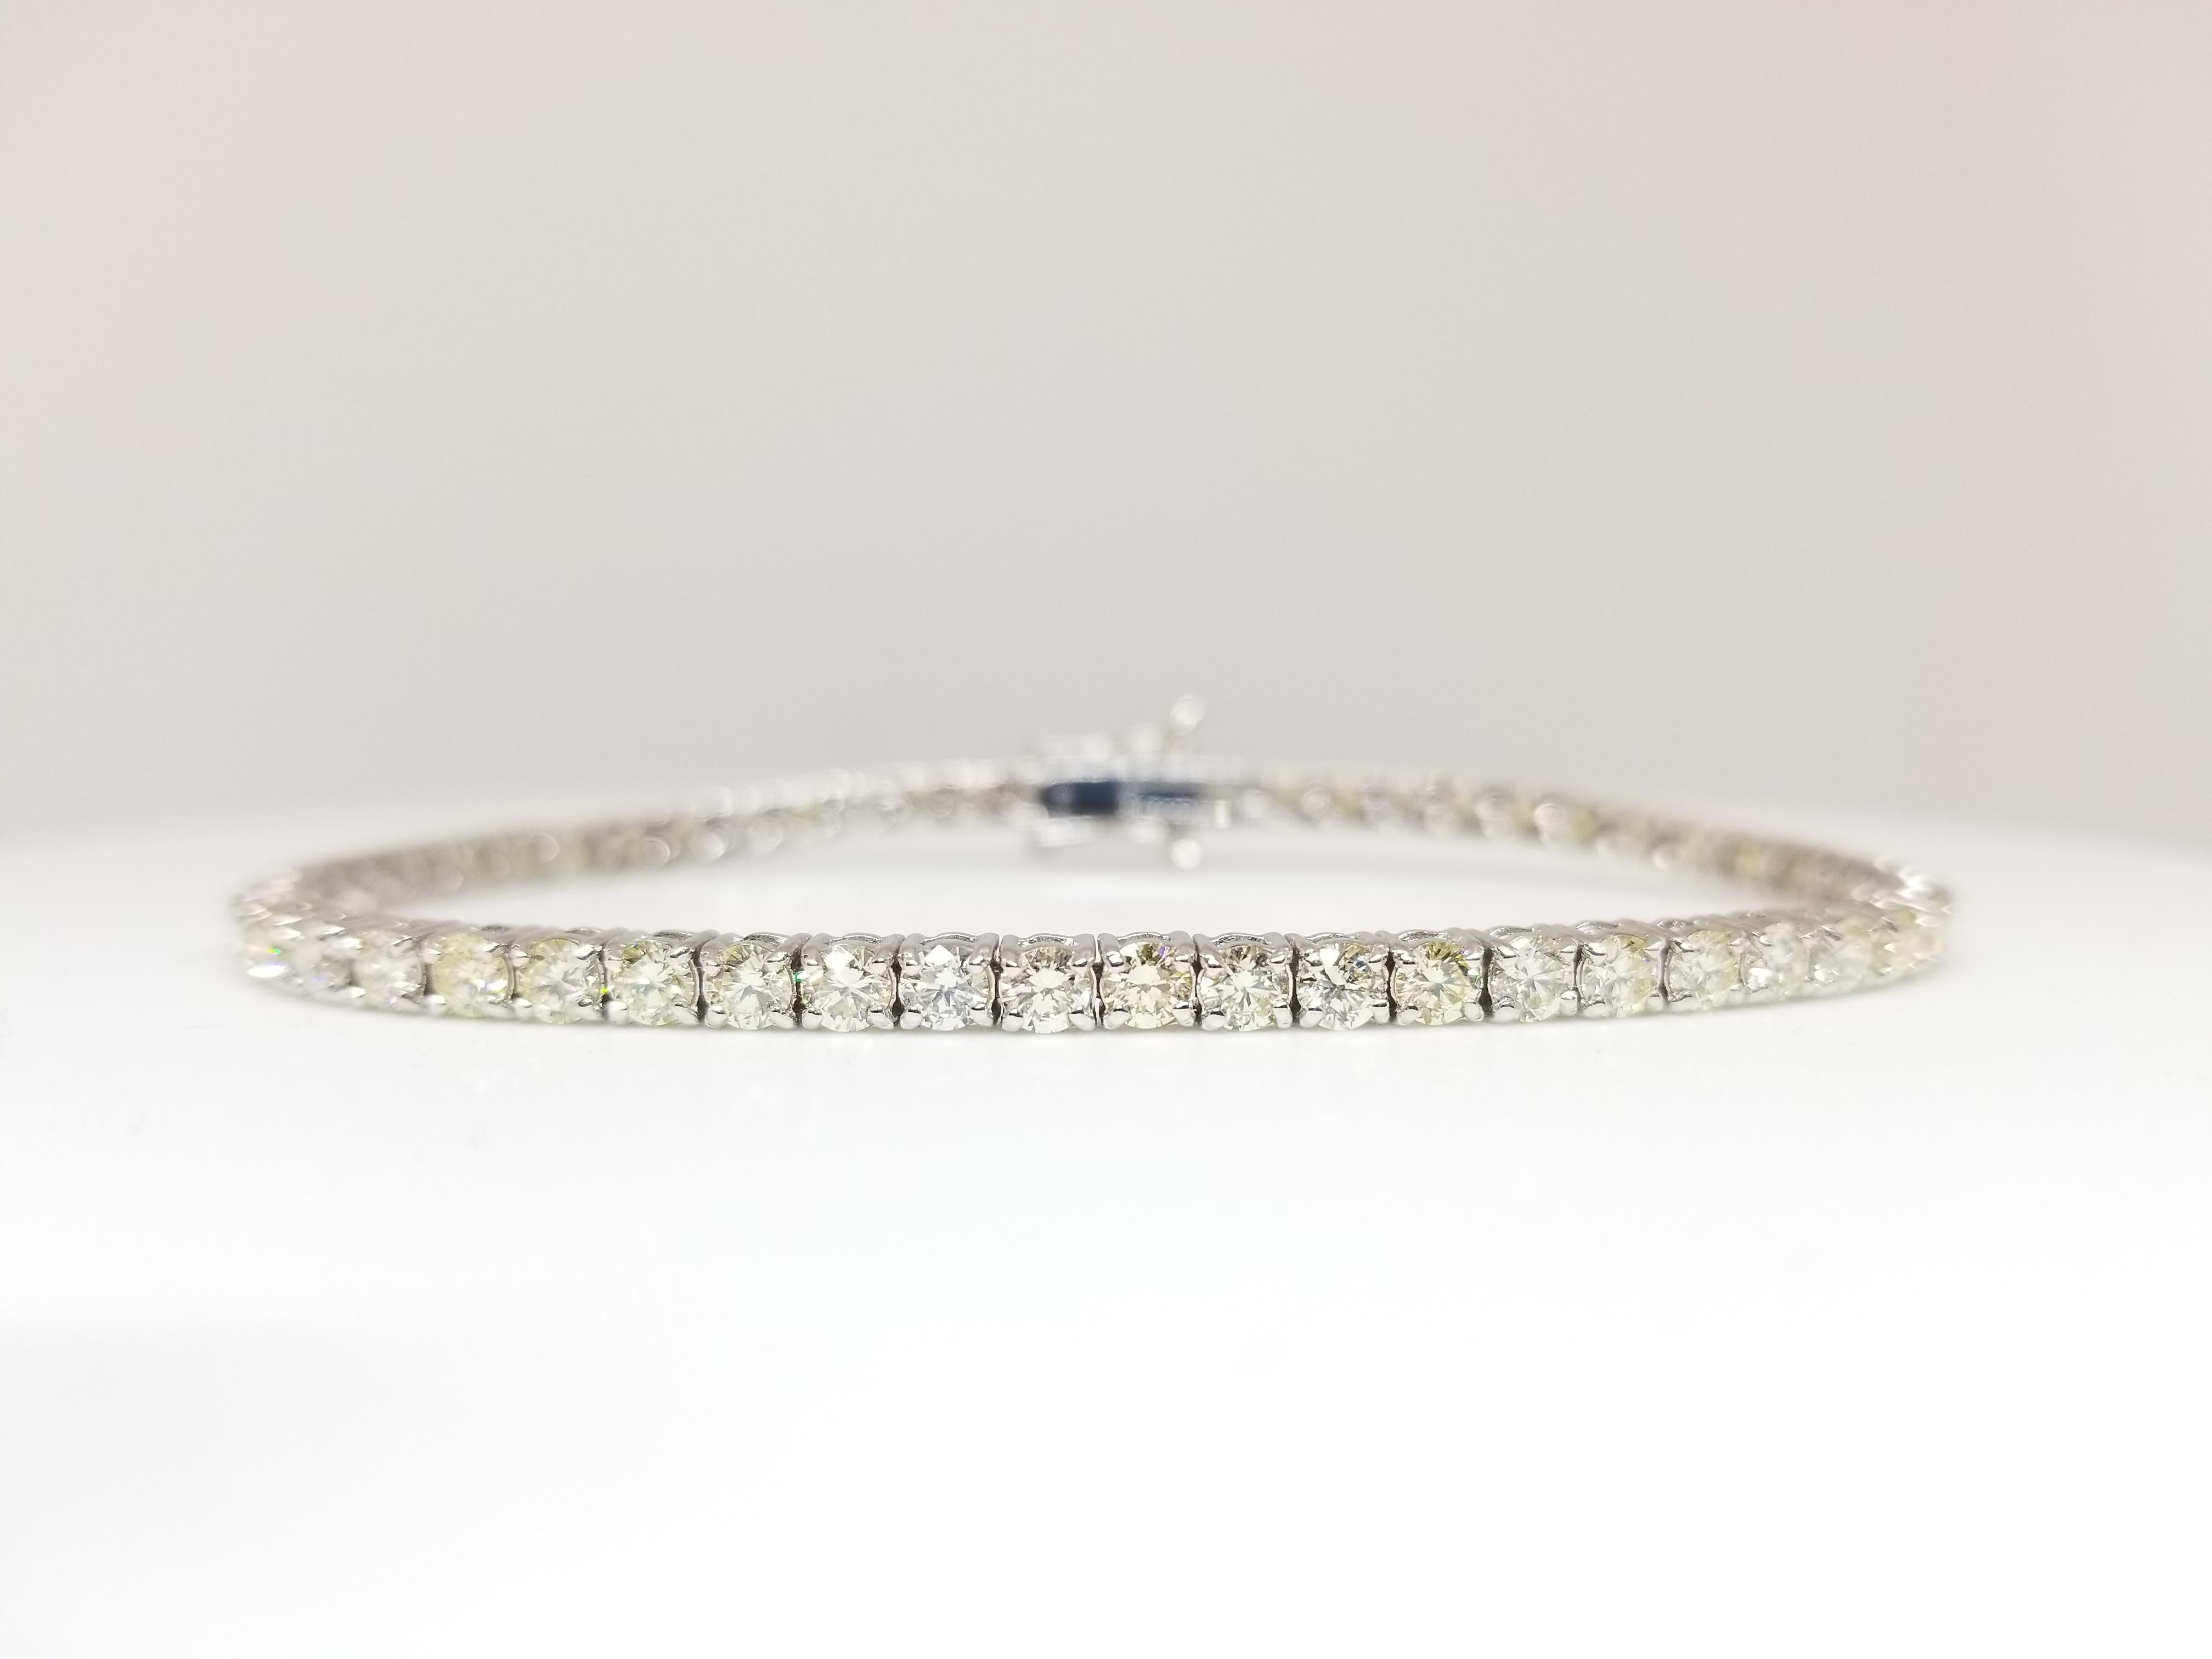 Very sparkling and shiny. a great quality tennis bracelet. 14k white gold. each stone is set in a classic four-prong style for maximum light brilliance. 7 inch length. Color I-J, Clarity SI2.